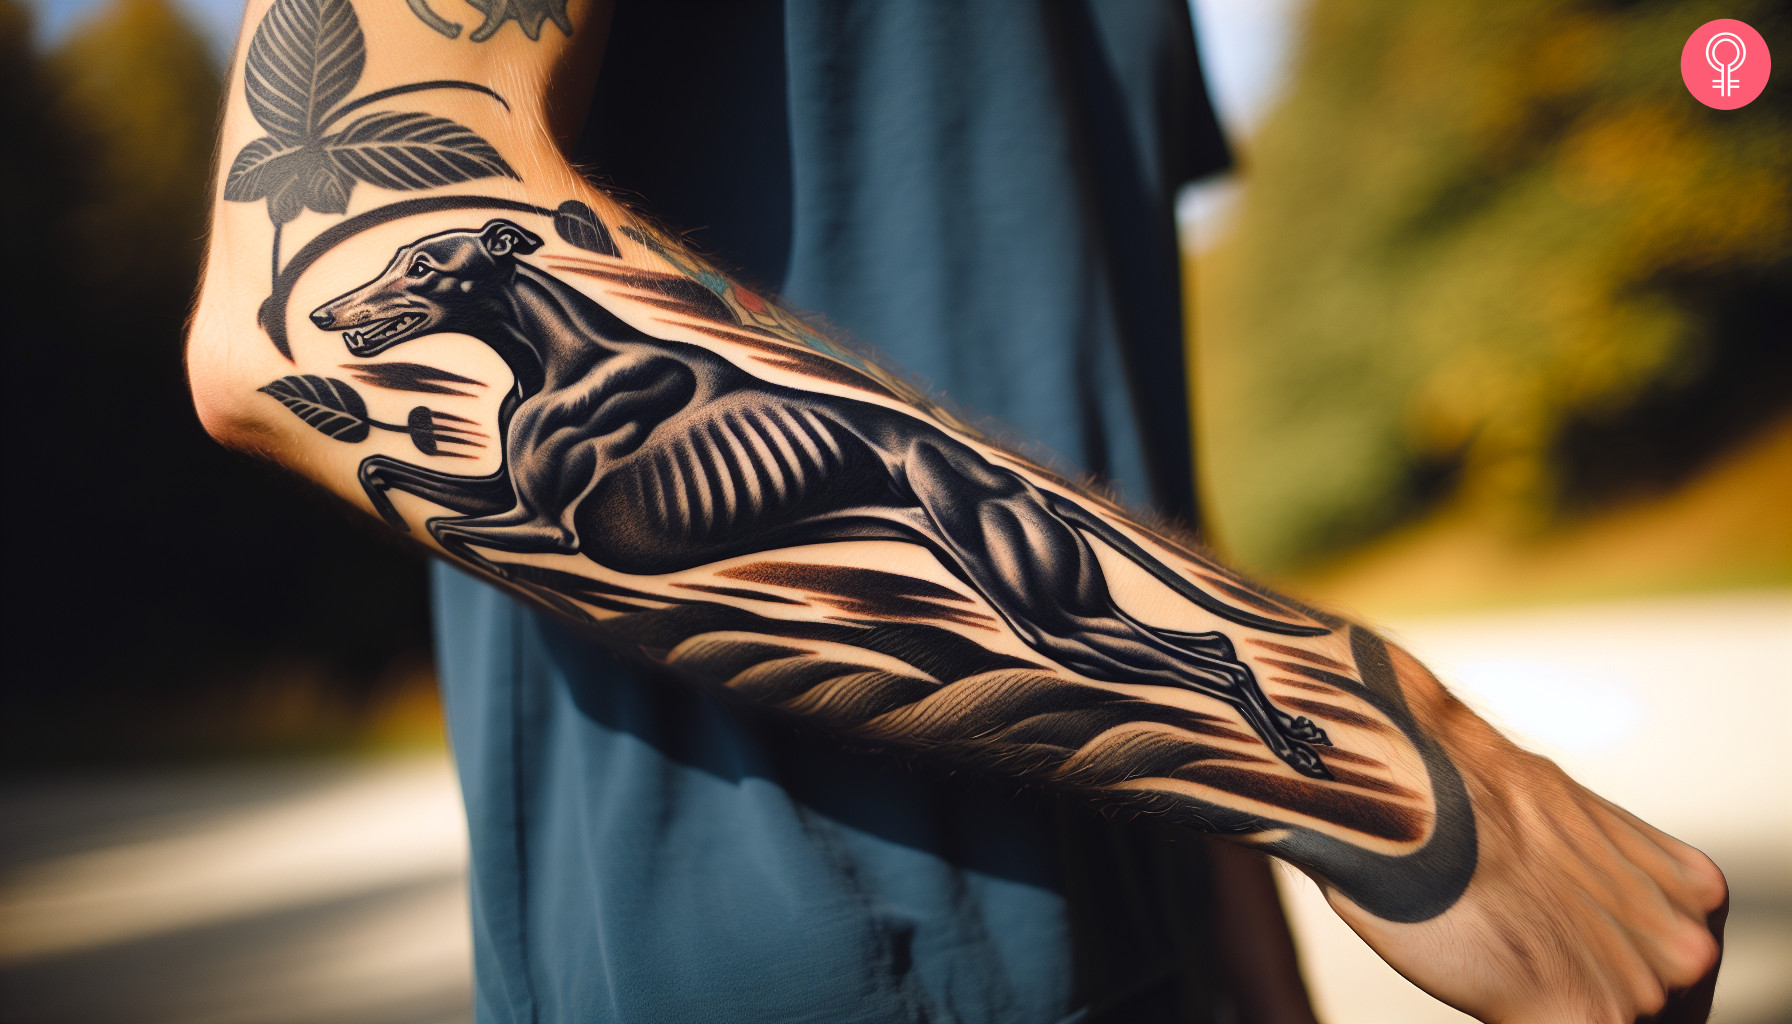 A tattoo of a running greyhound on the arm of a man